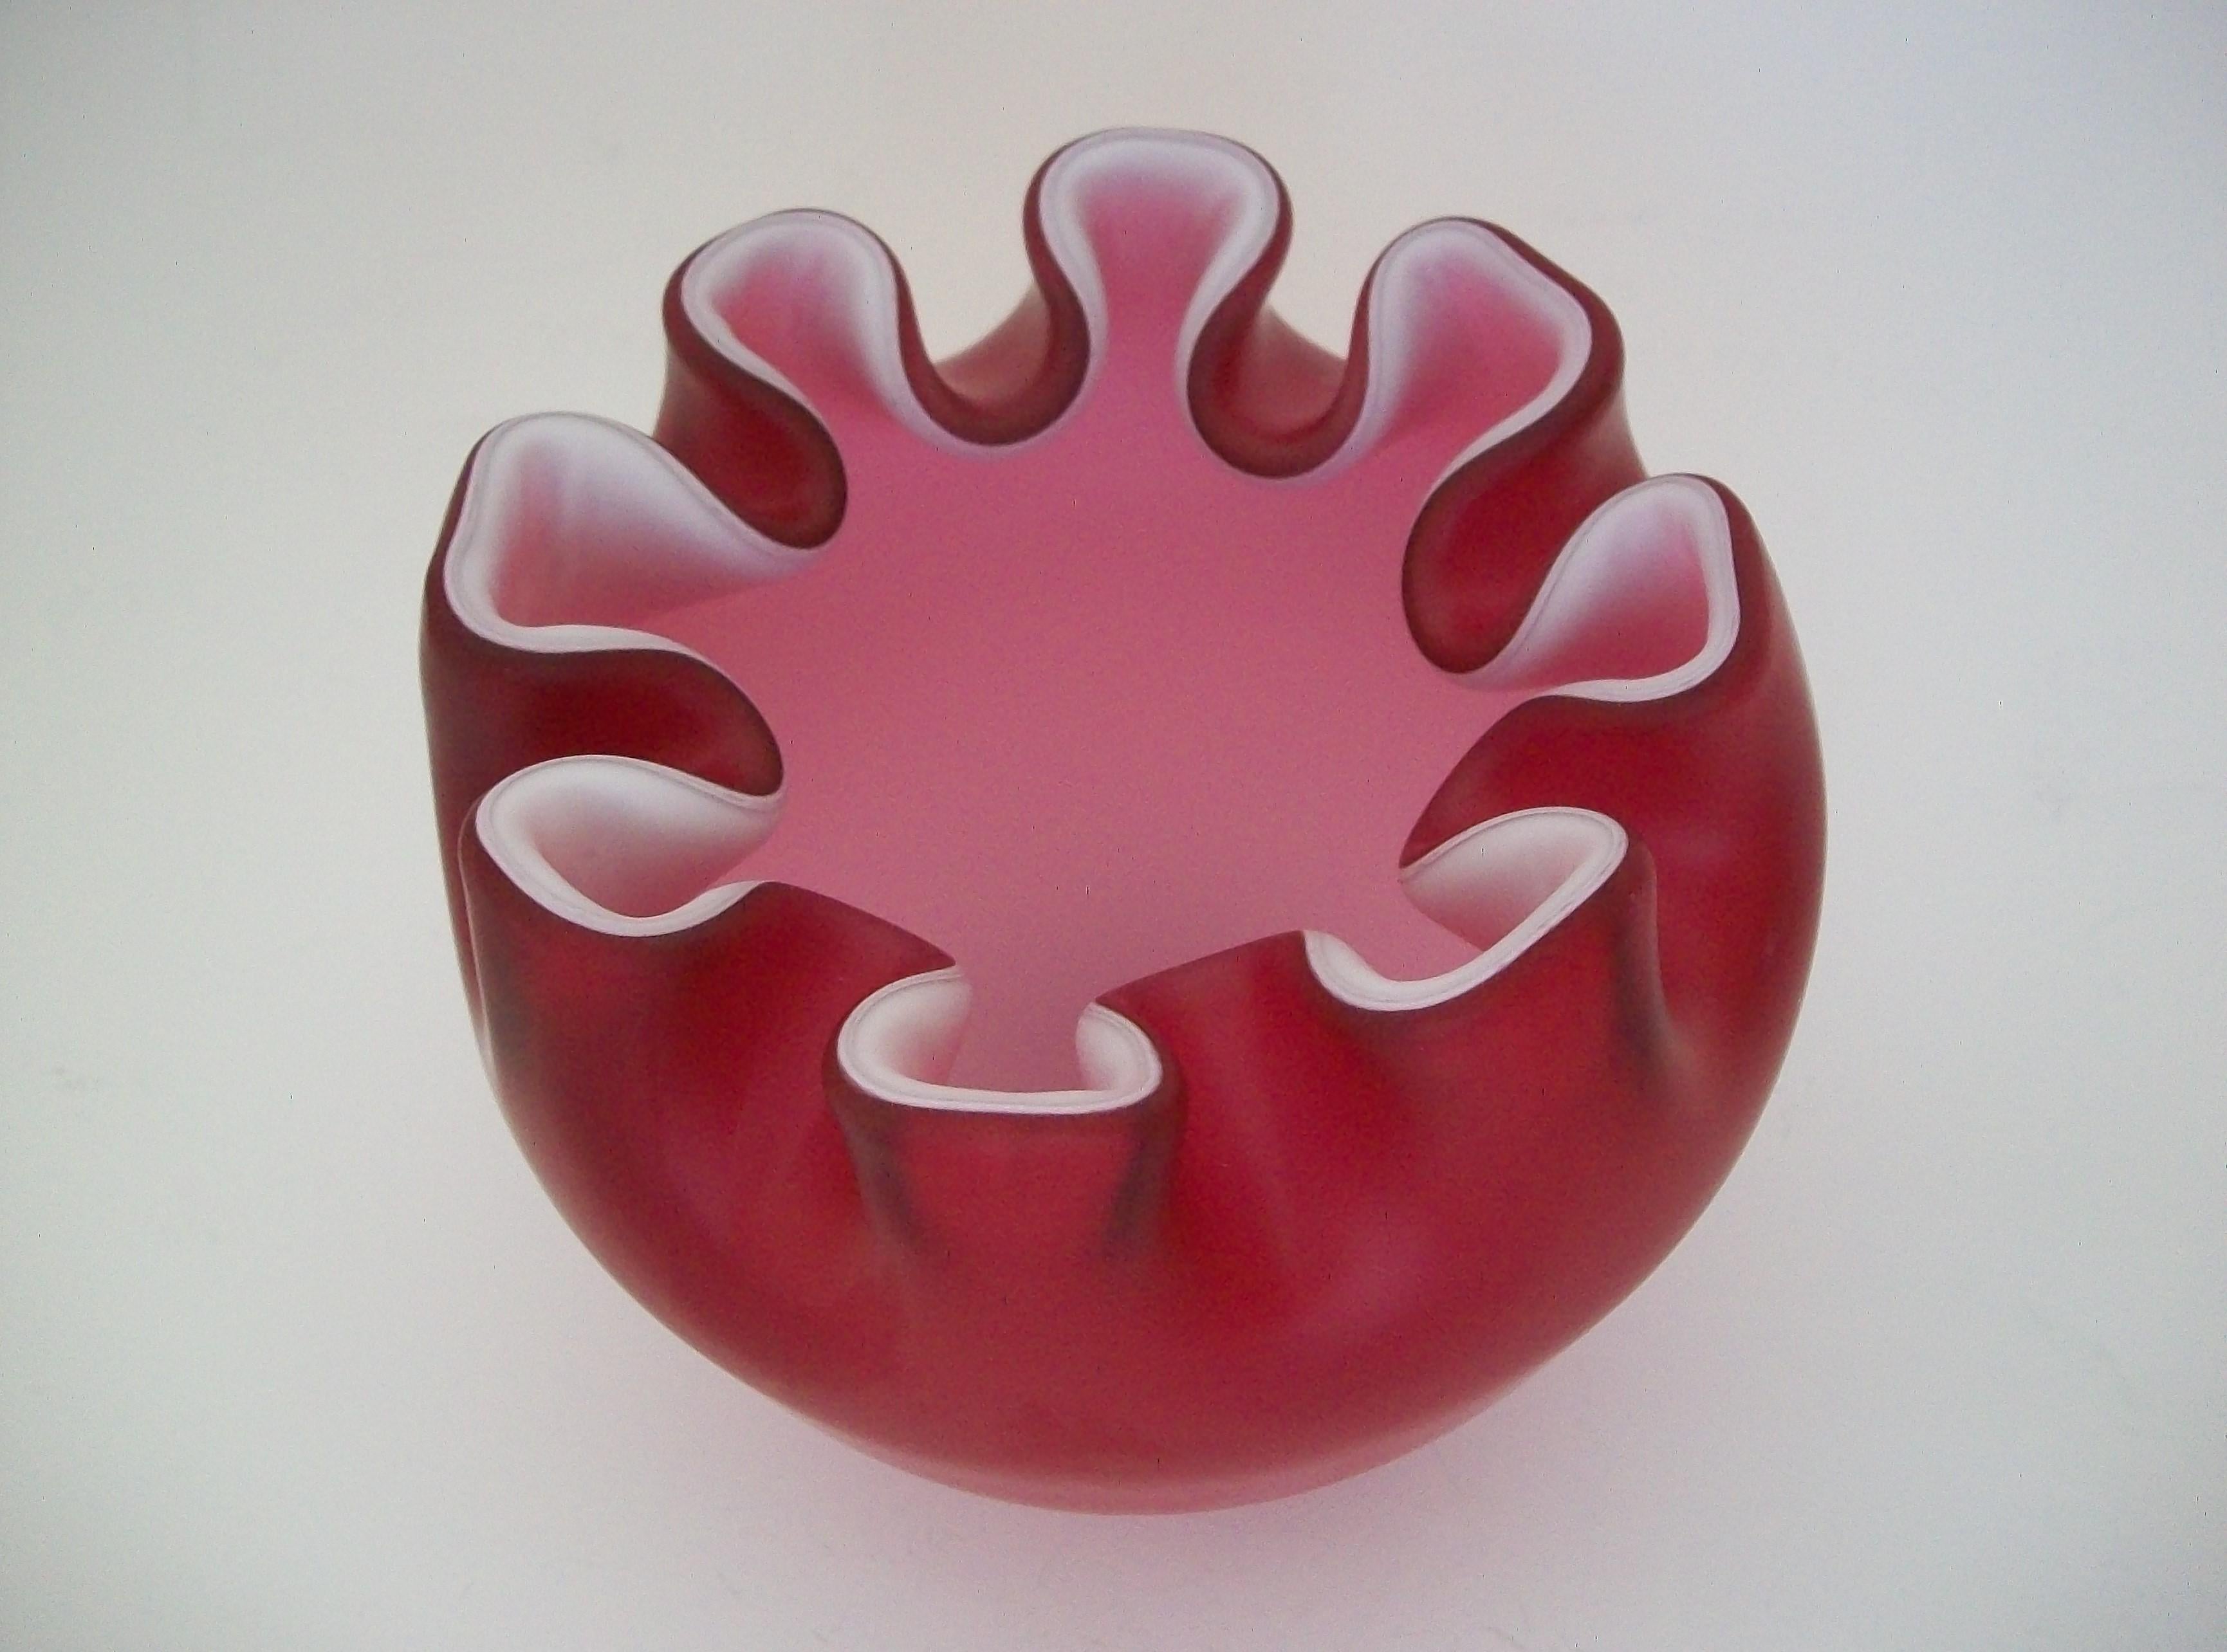 Hand-Crafted Antique Victorian Cranberry & White Satin Glass Rose Bowl - U.S.A. - Circa 1900 For Sale